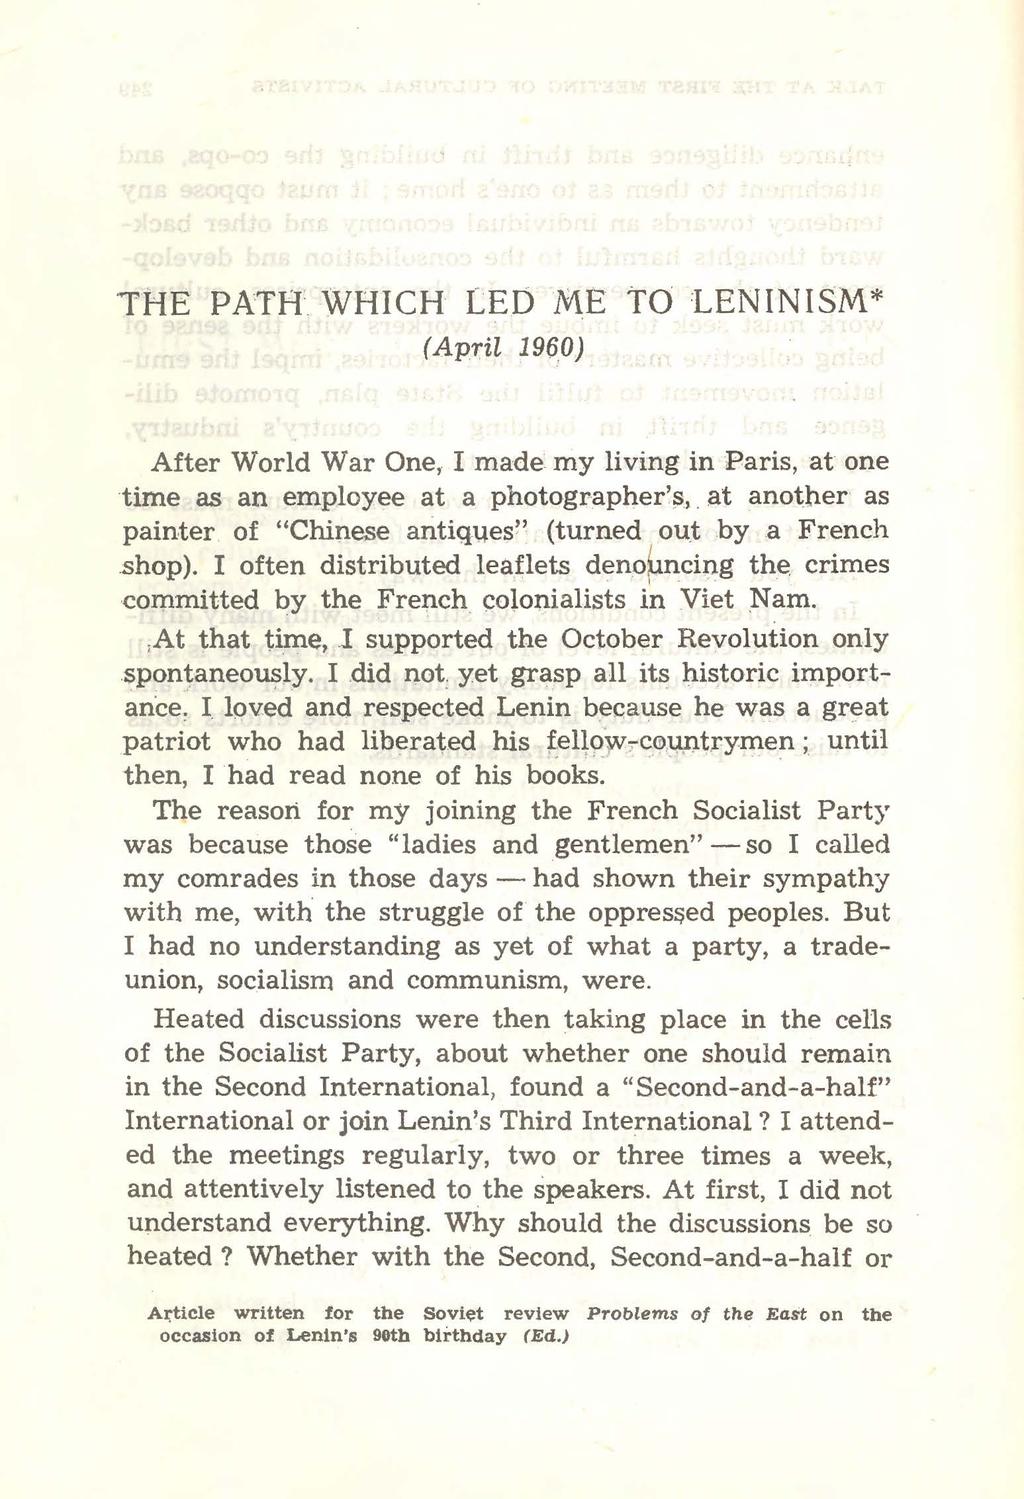 THE PATH WHICH LEO ME to LENINISM* (AprU 1960) After World War One, I made my living in Paris, at one time as an employee at a photographer'~,. at ano~her as painter of "Chinese aritiqqes!